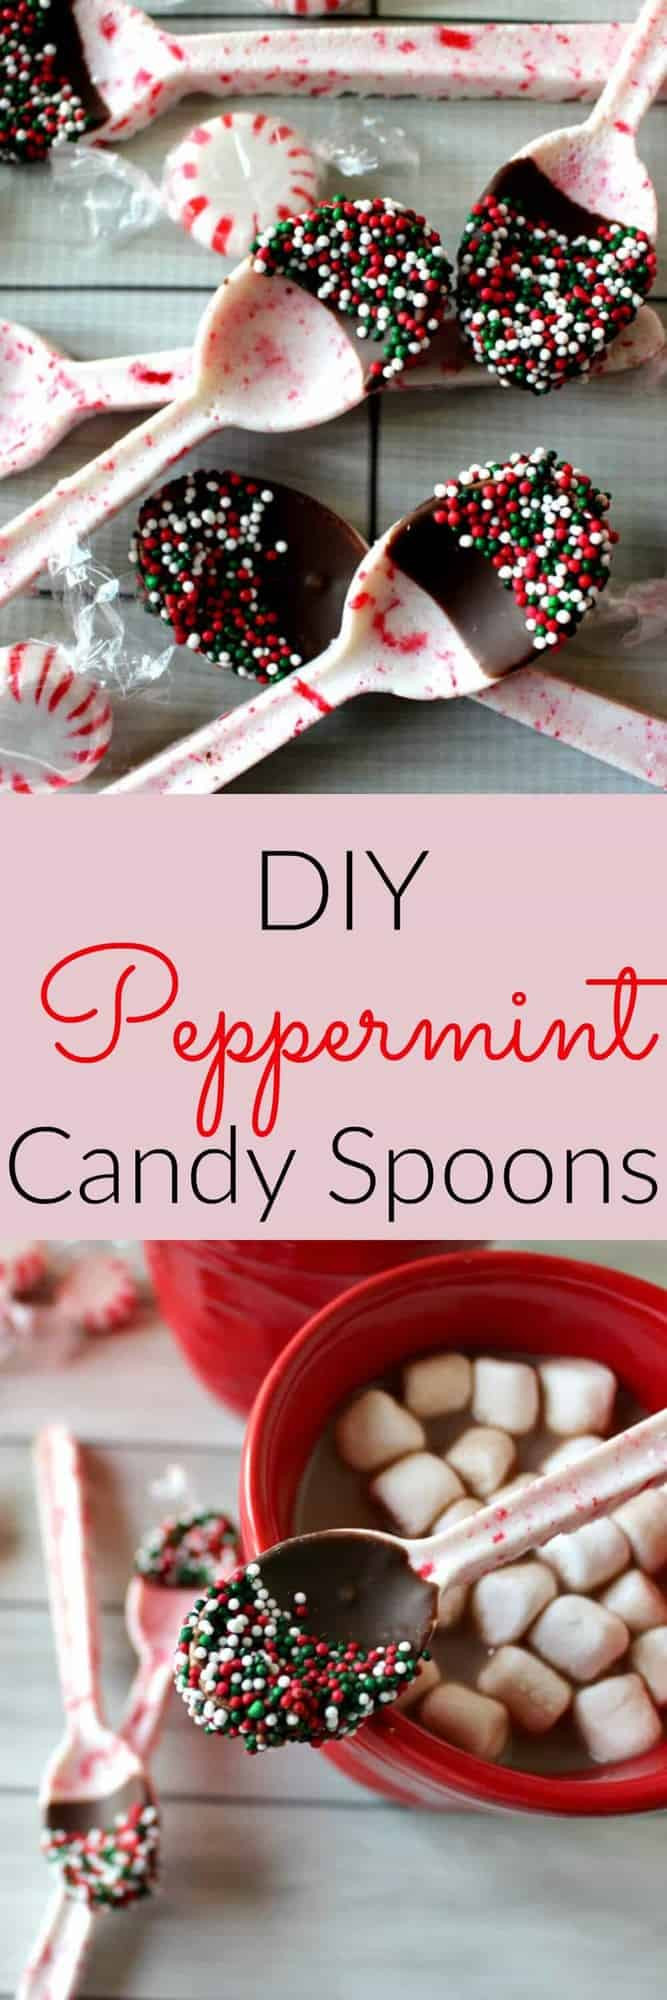 Christmas Chocolate Gift Ideas
 DIY Peppermint Candy Spoons Princess Pinky Girl